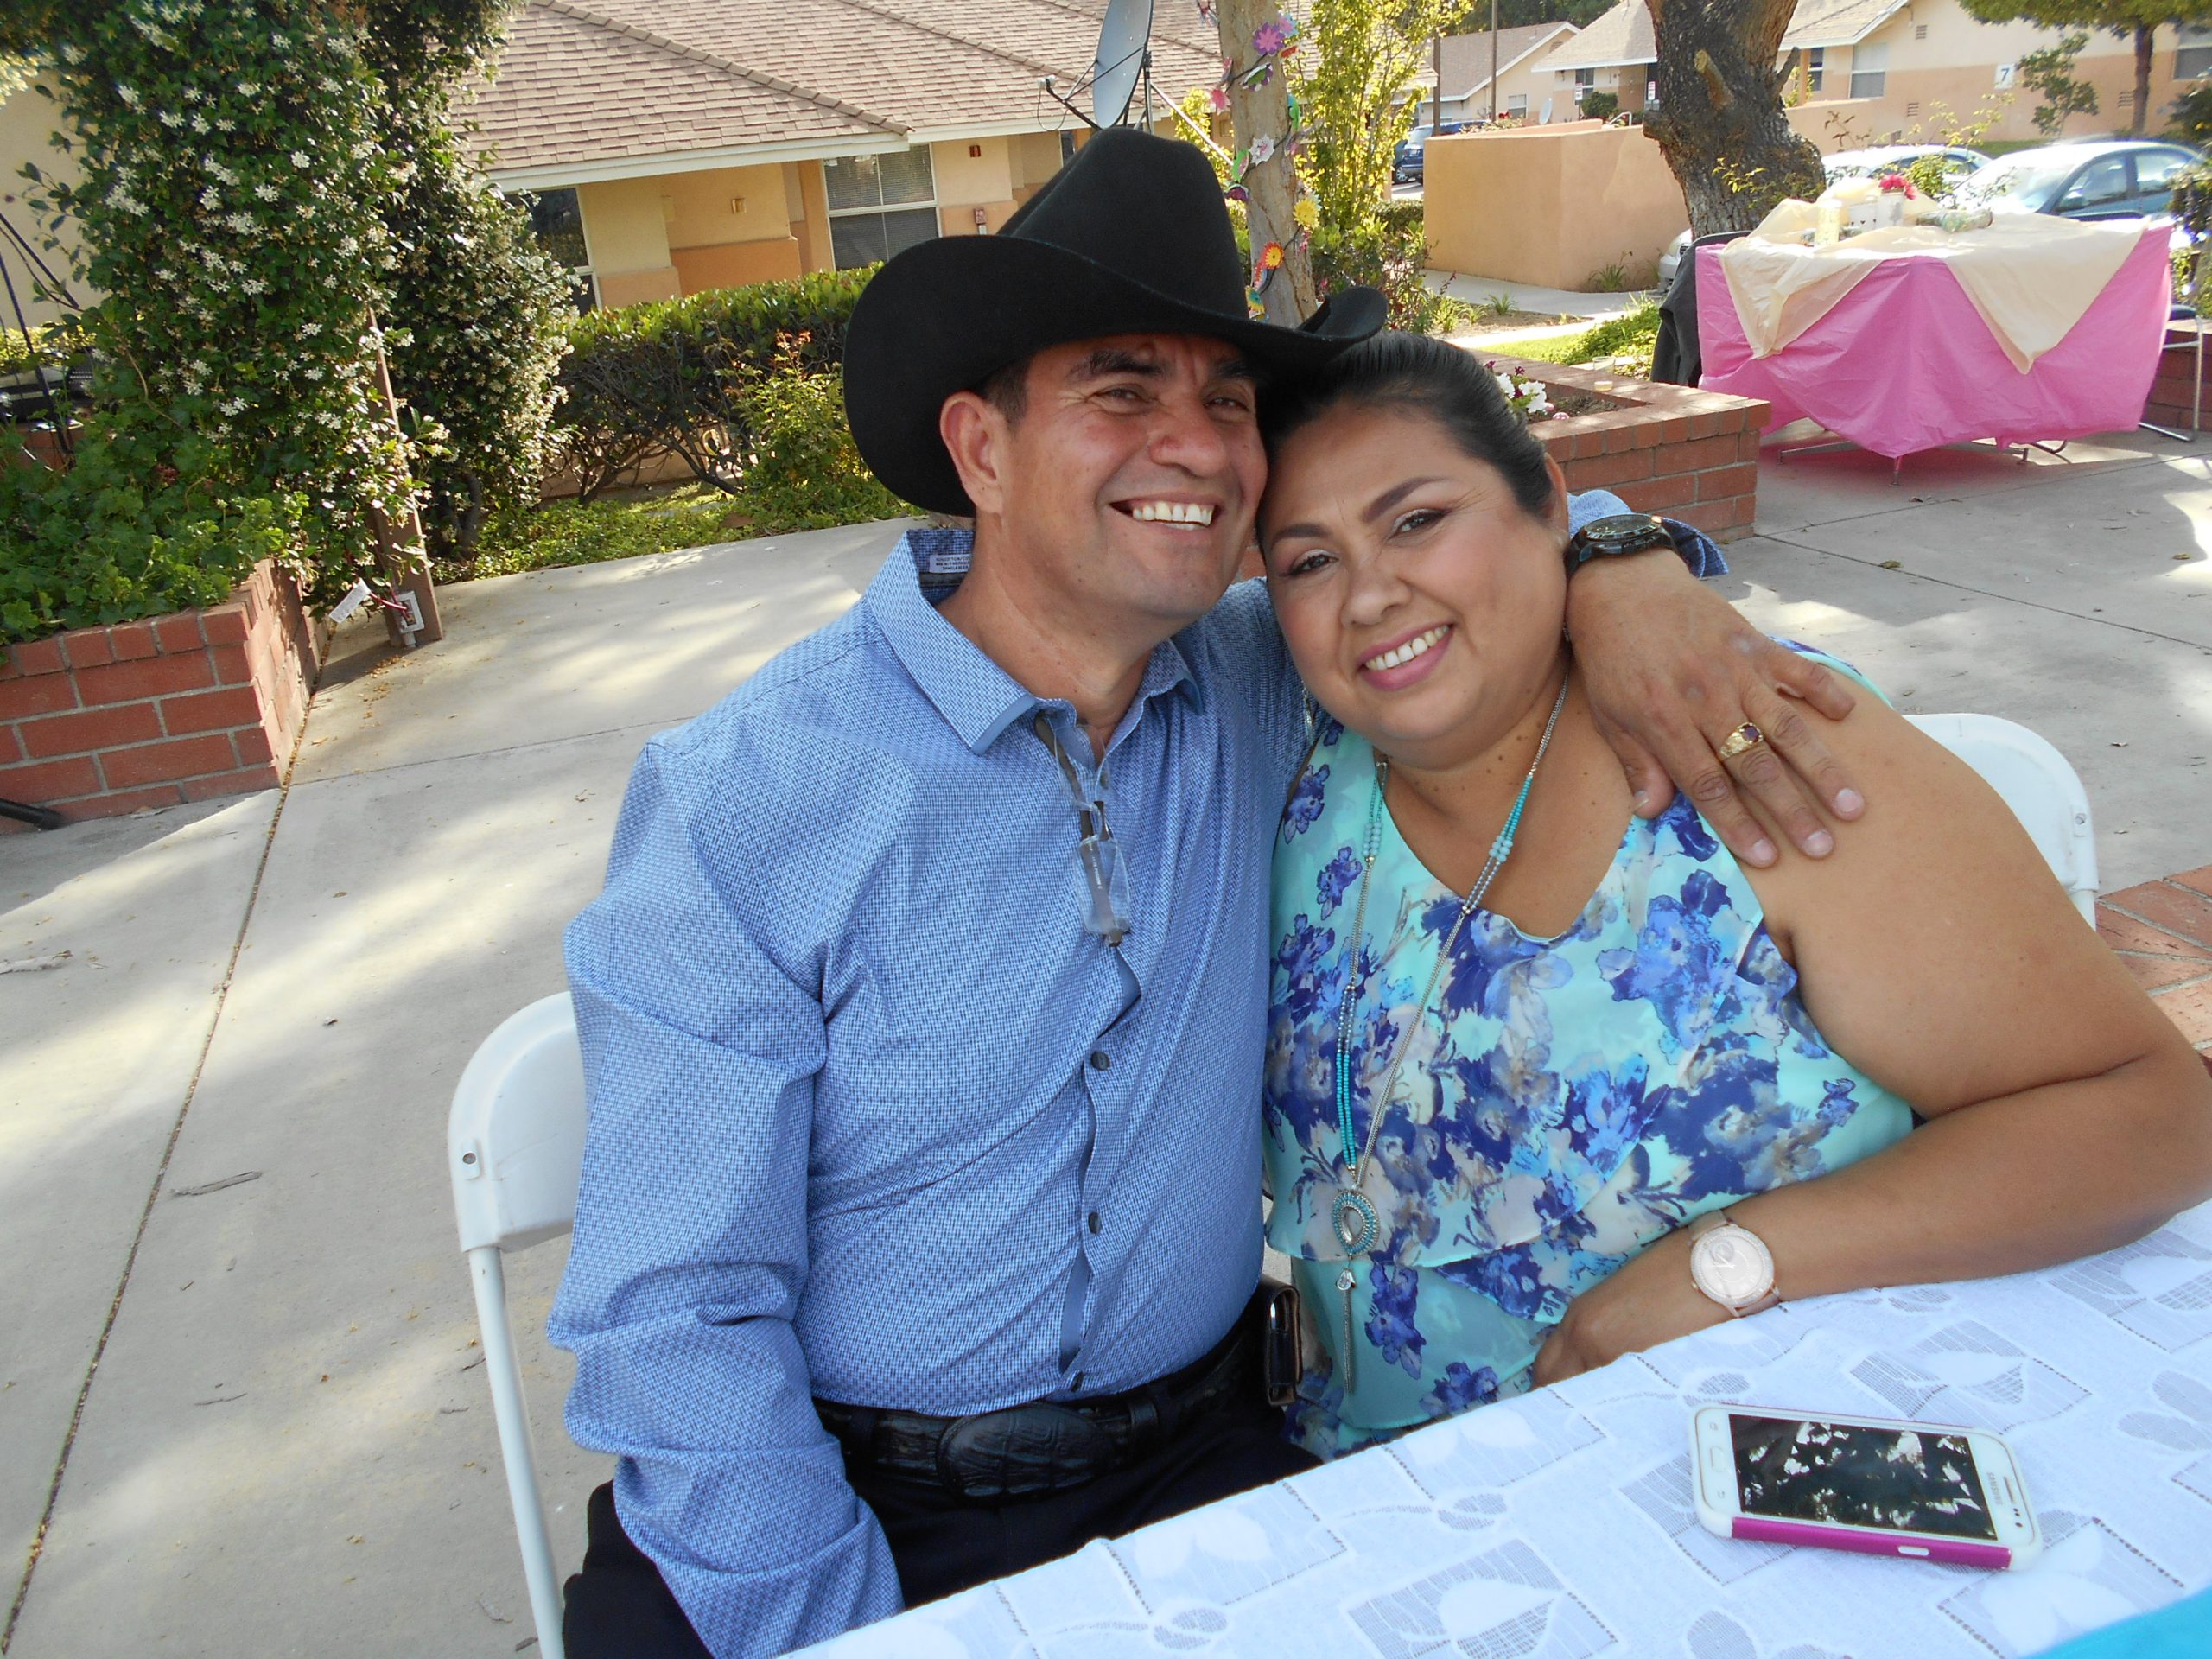 Photo of a latinx man and woman, the woman in a flowered top and the man in a blue shirt and cowboy hat, at Cambridge Gardens senior housing community.